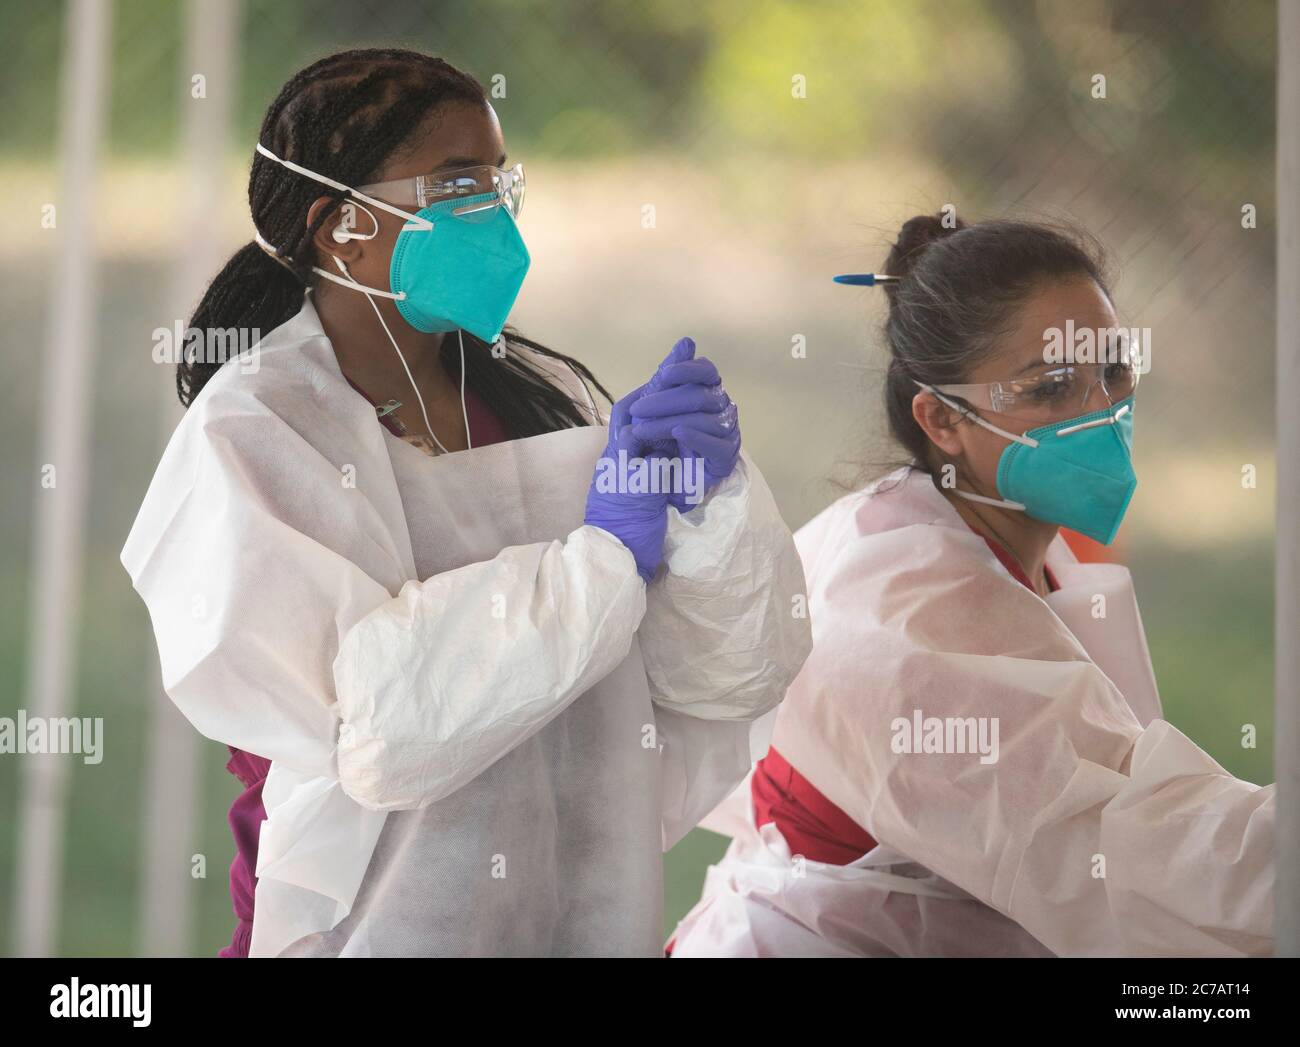 Austin, TX USA July 15, 2020:Medical technicians working for Austin Public Health don protective gear (PPE) and perform free COVID-19 screenings in a public park. Texas has seen a huge spike in coronavirus cases with almost 300,000 cases resulting in at least 3,432 deaths. Credit: Bob Daemmrich/Alamy Live News Stock Photo